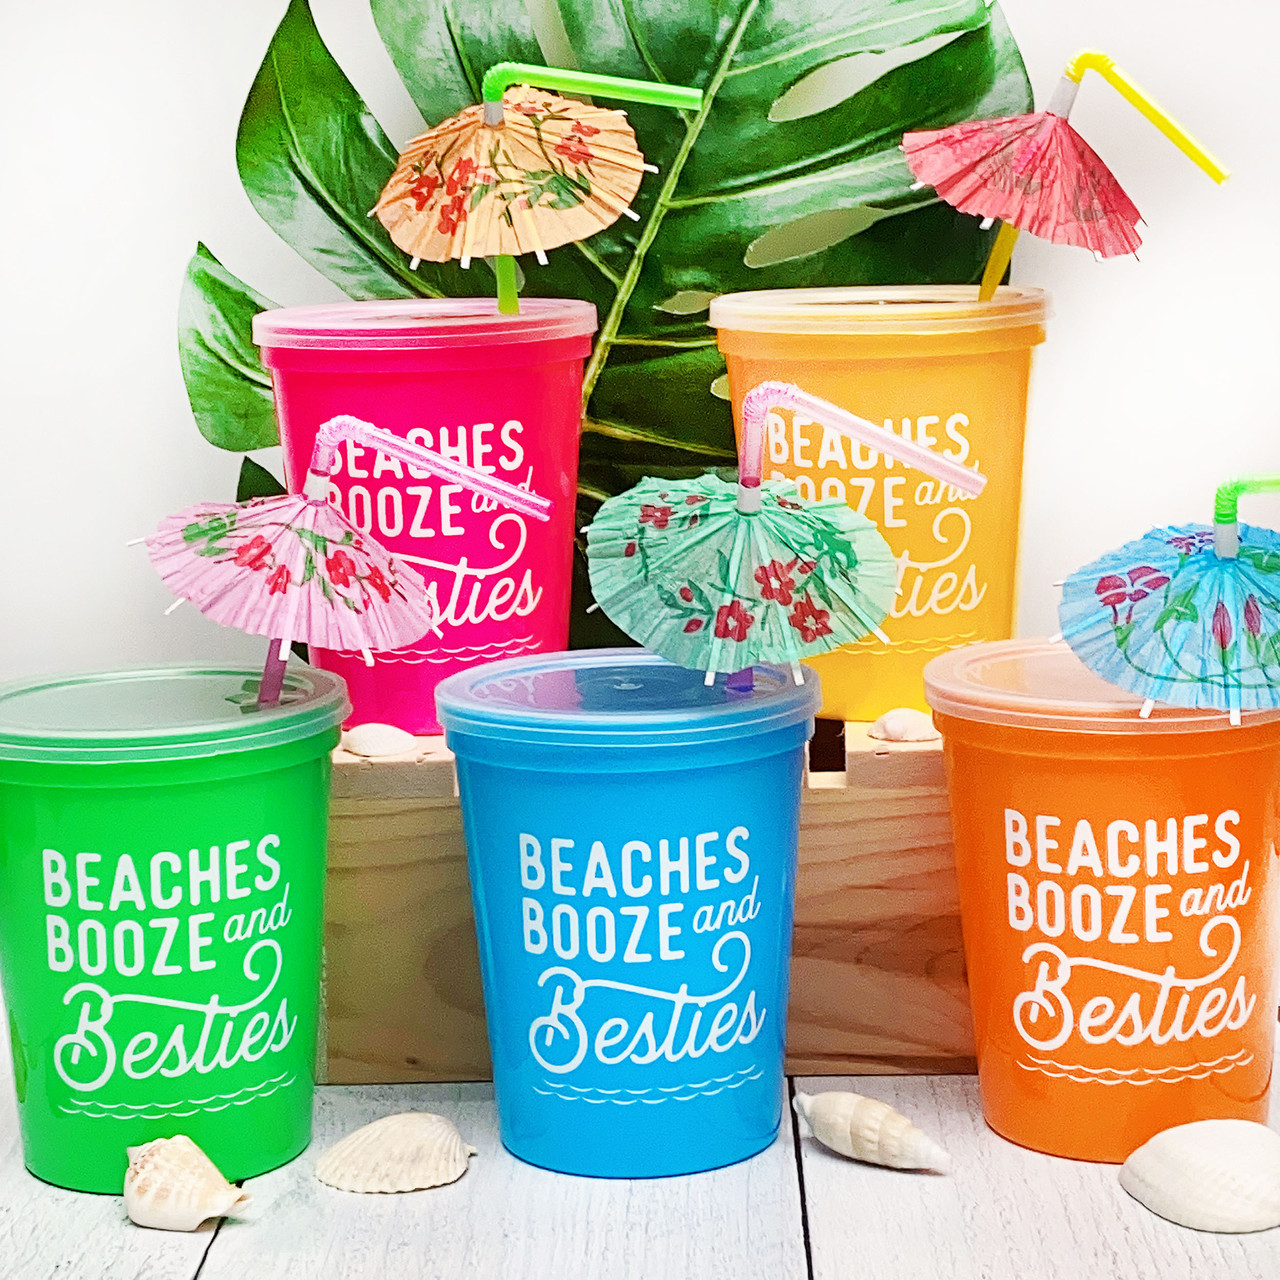 https://cdn11.bigcommerce.com/s-5grzuu6/images/stencil/1280x1280/products/5169/52071/Beaches-Booze-Besties_Plastic_Cups_with_Straws_and_Lids__40423.1681854771.jpg?c=2